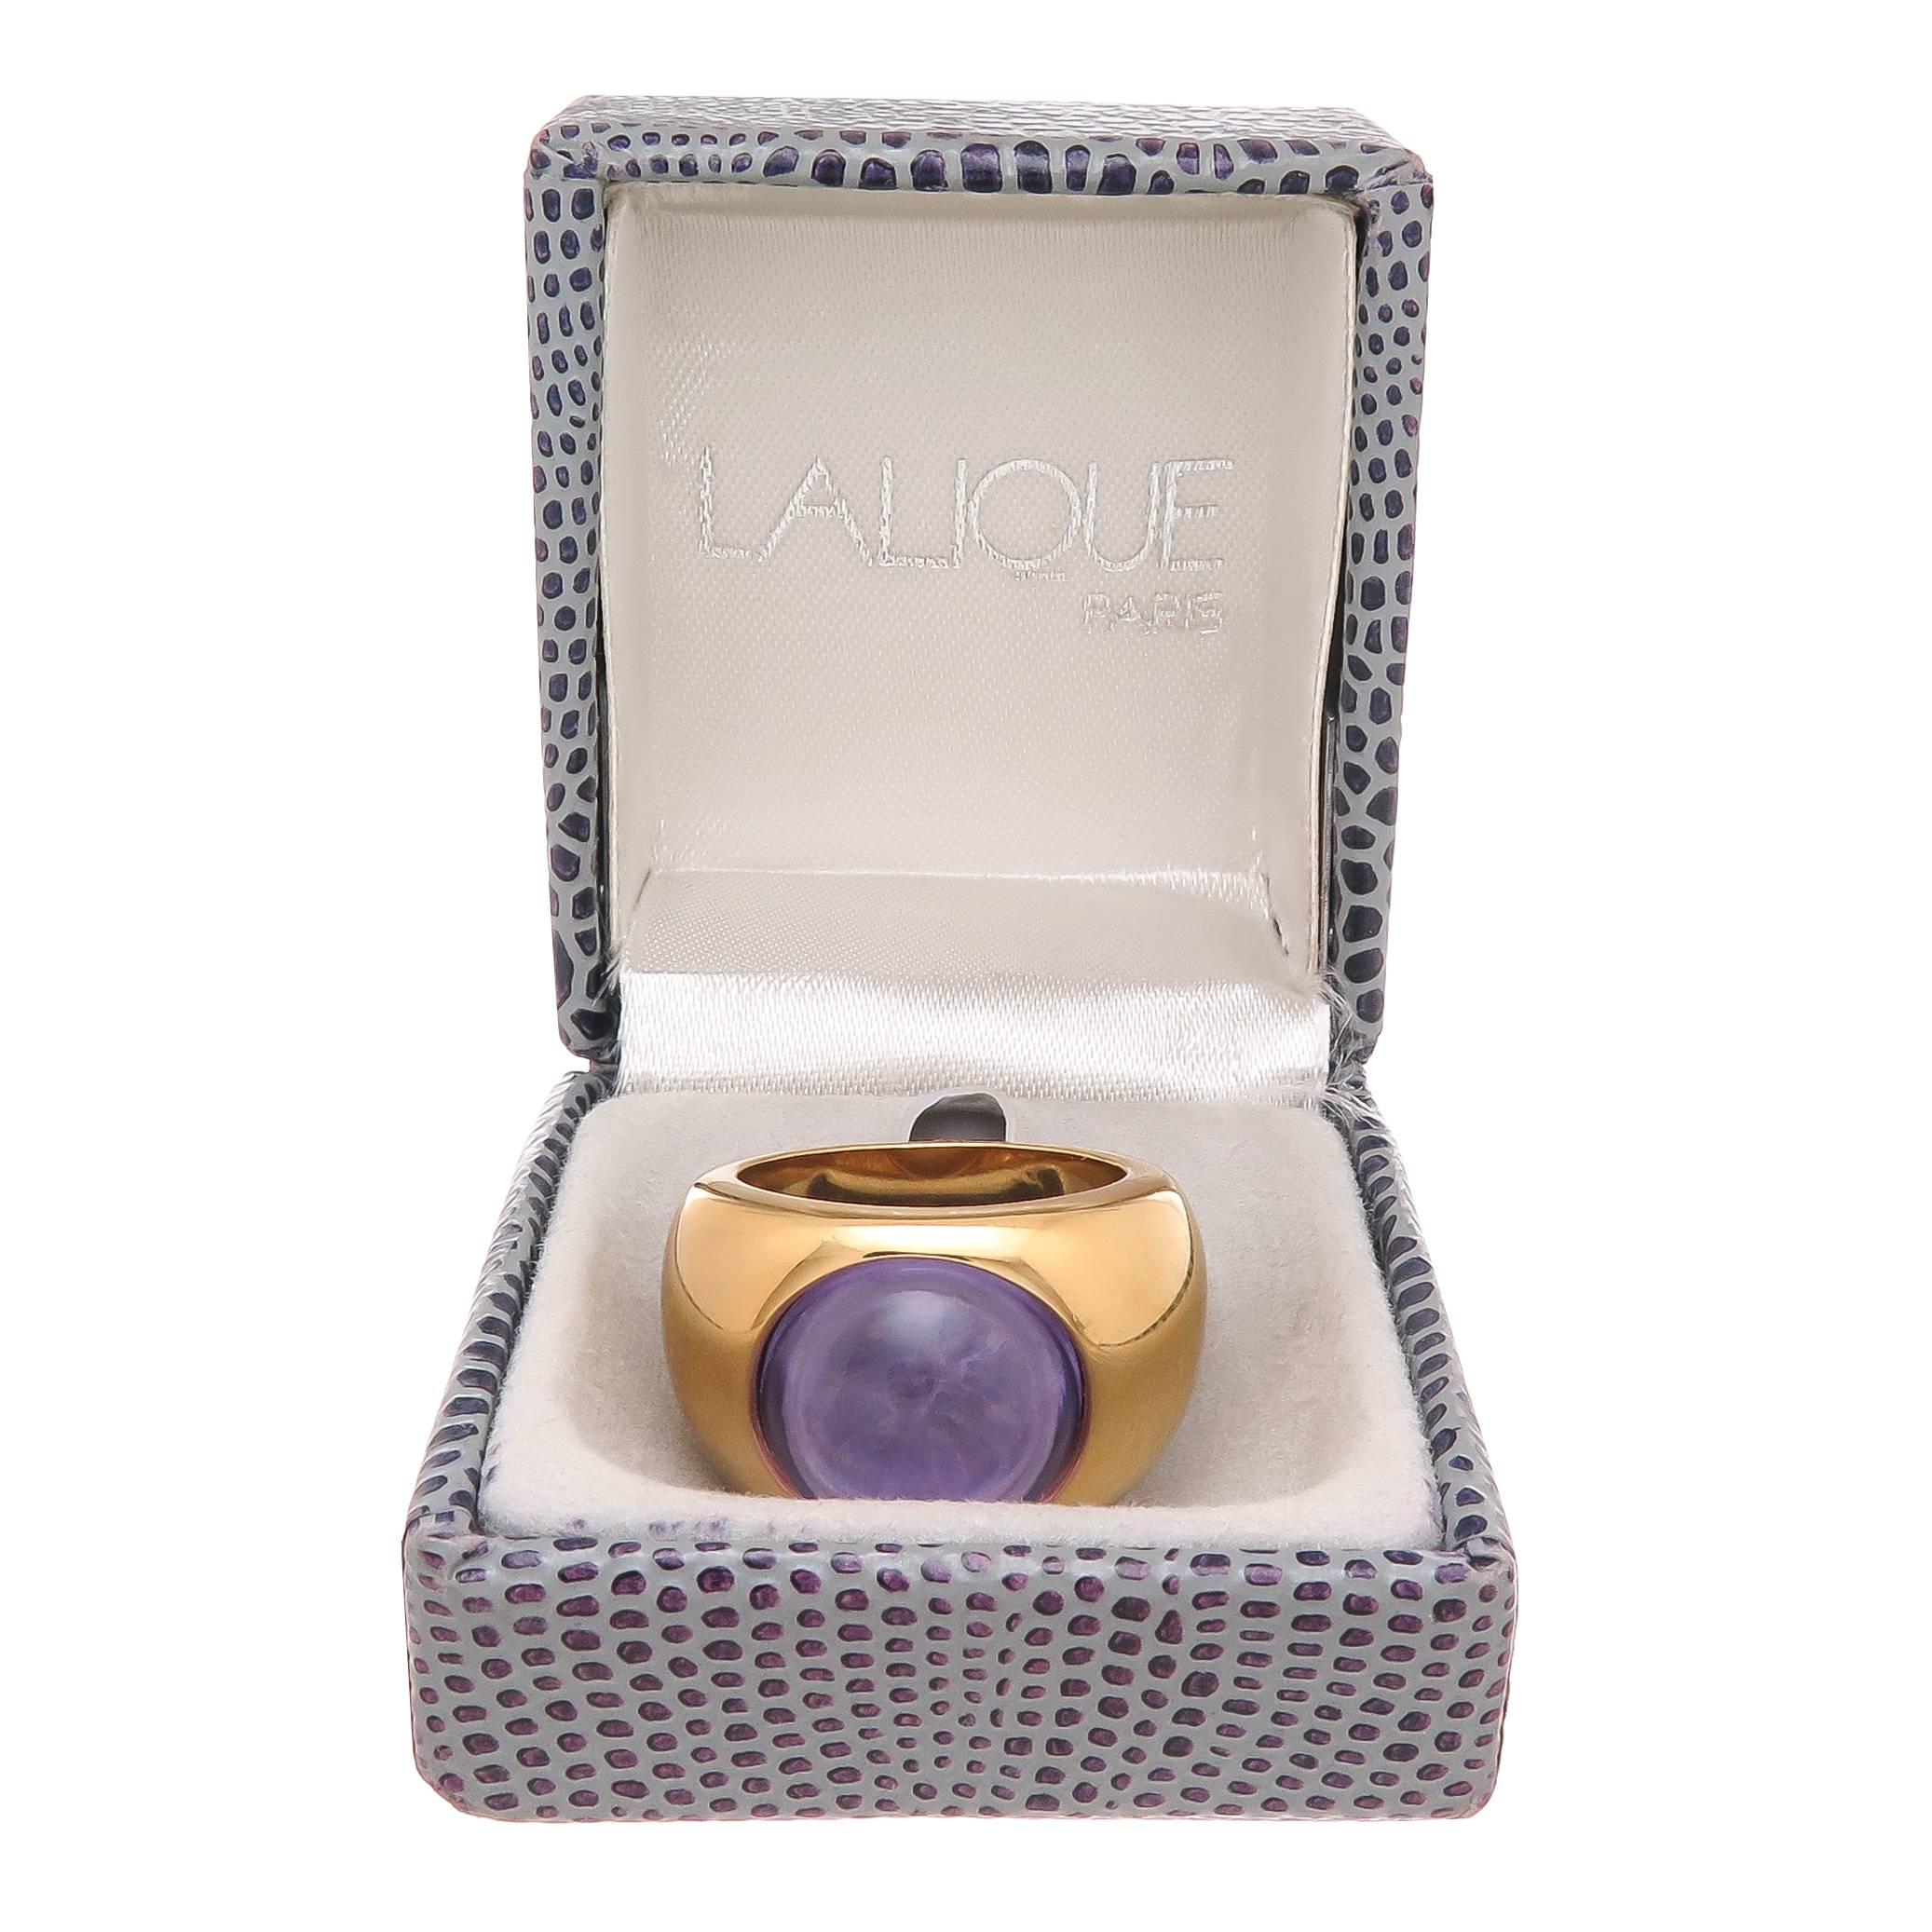 Circa 1990s Lalique Ring, Gilt metal and Centrally set with a Purple Crystal Dome. Finger size = 7 1/2, in original Lalique Box.